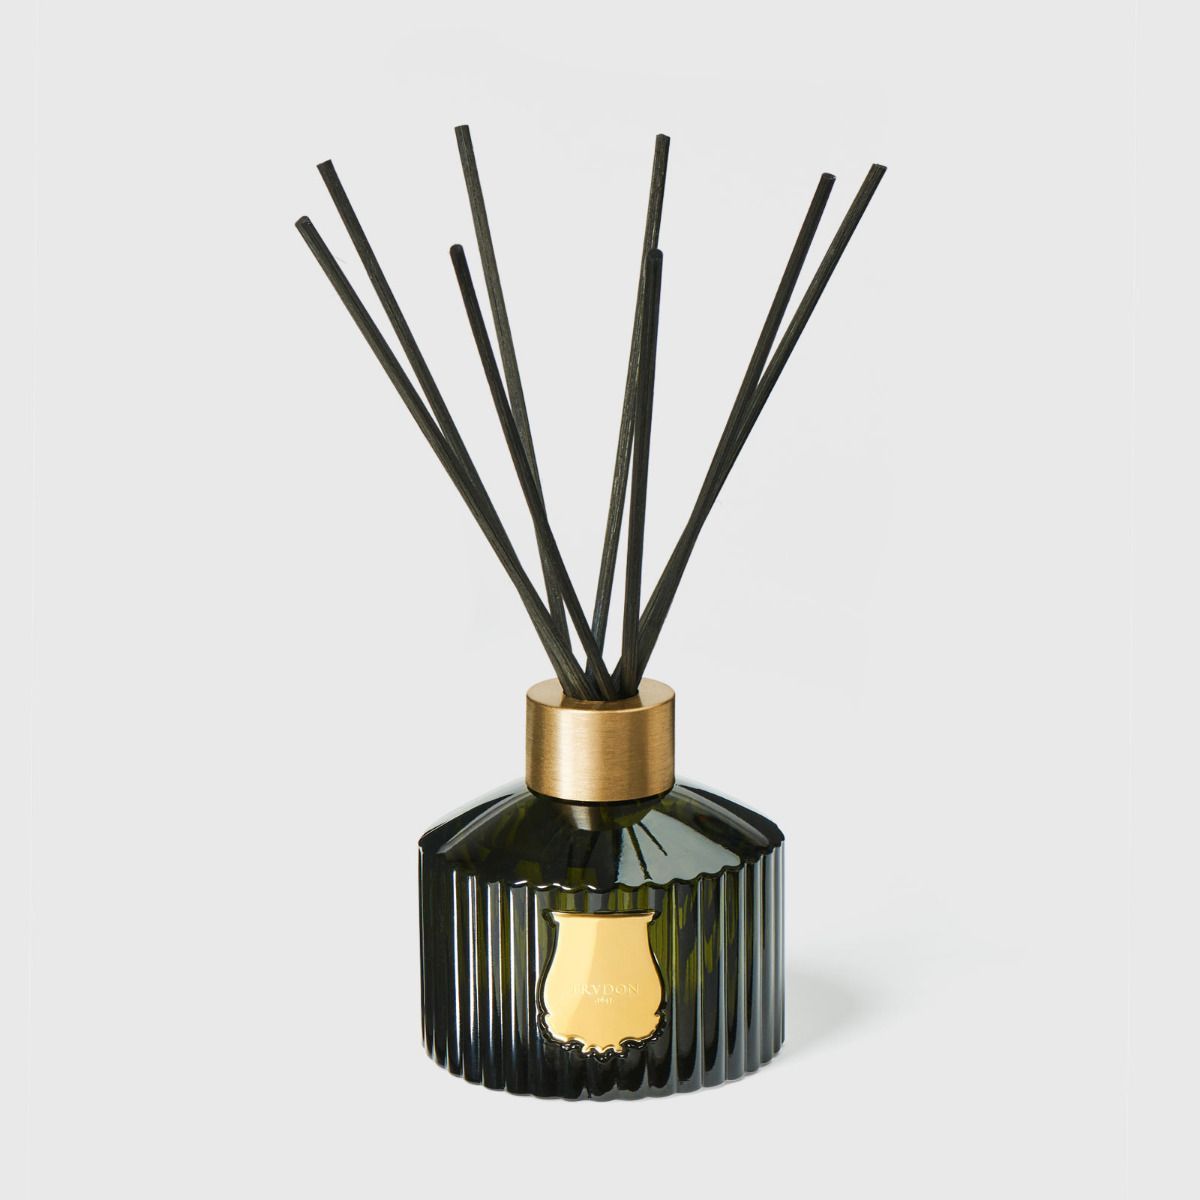 Shop Odalisque, Home Diffuser from DiMare Design on Openhaus